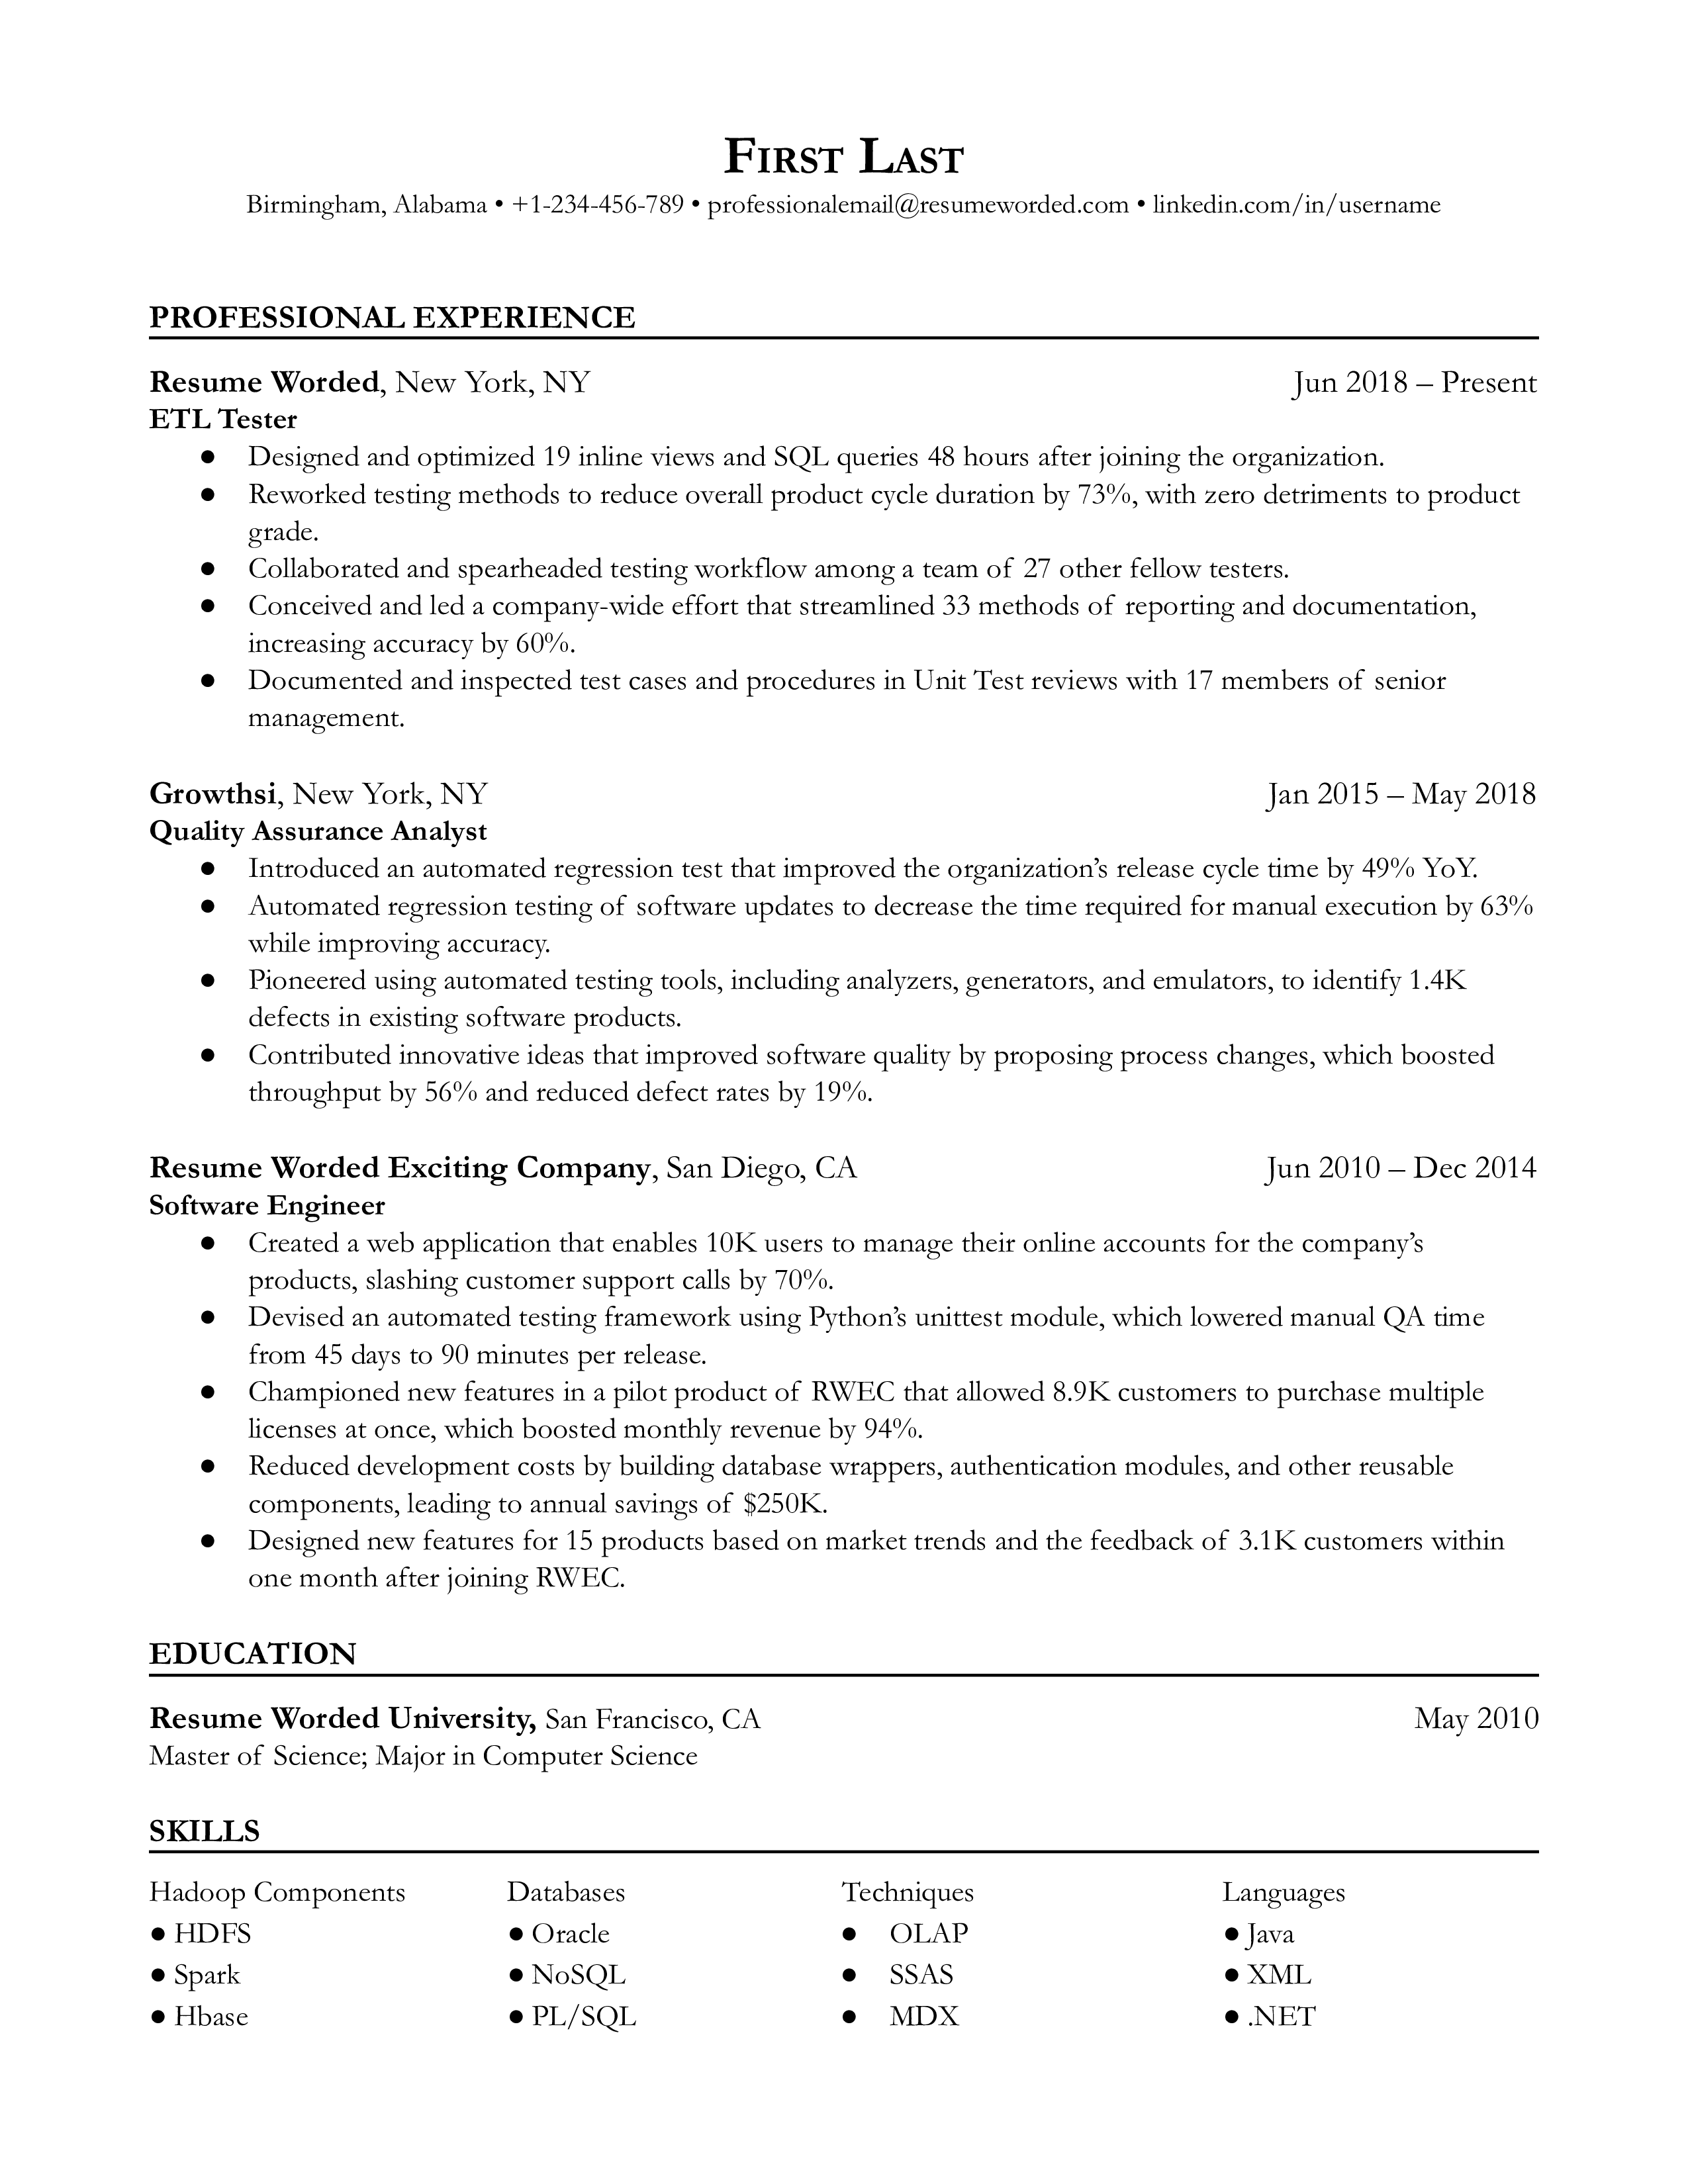 An ETL tester resume example that uses metrics to quantify achievements.